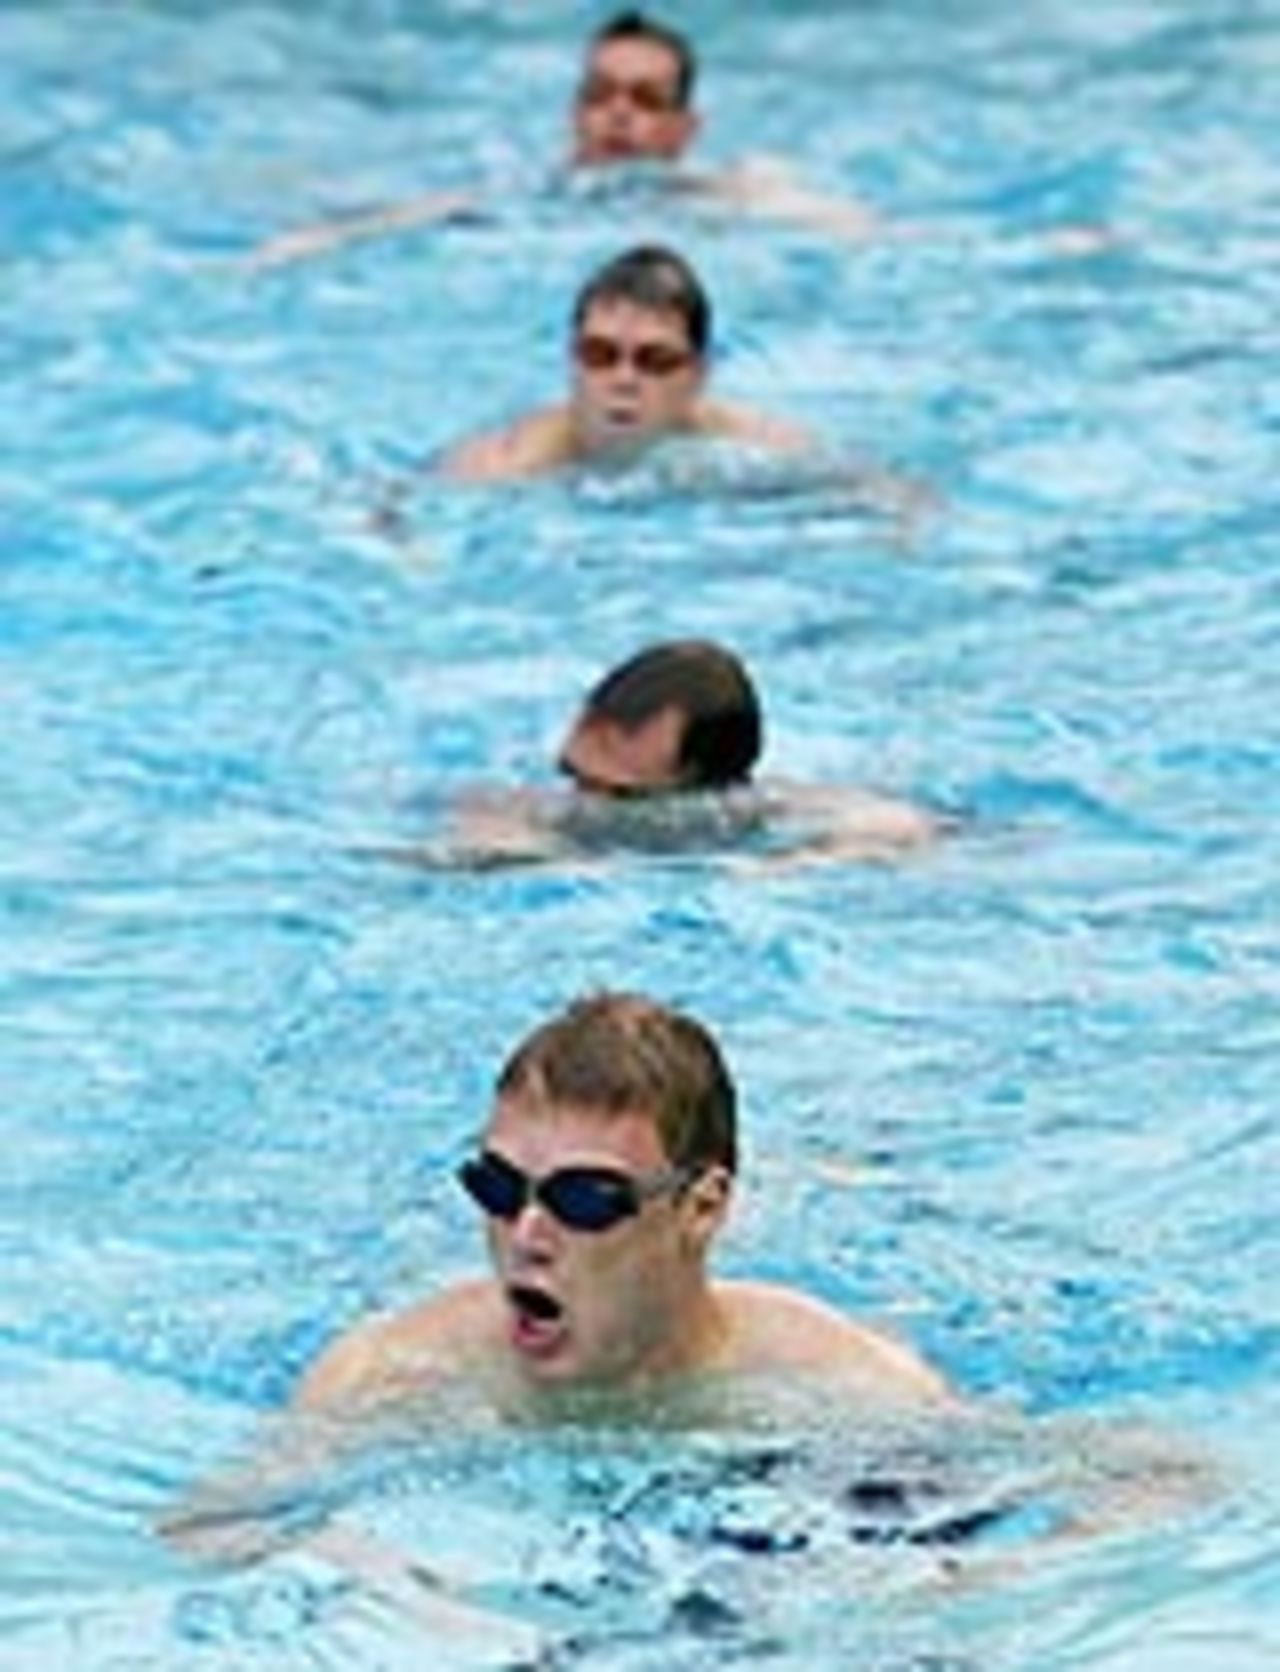 England in the swim, preparing for the second Test